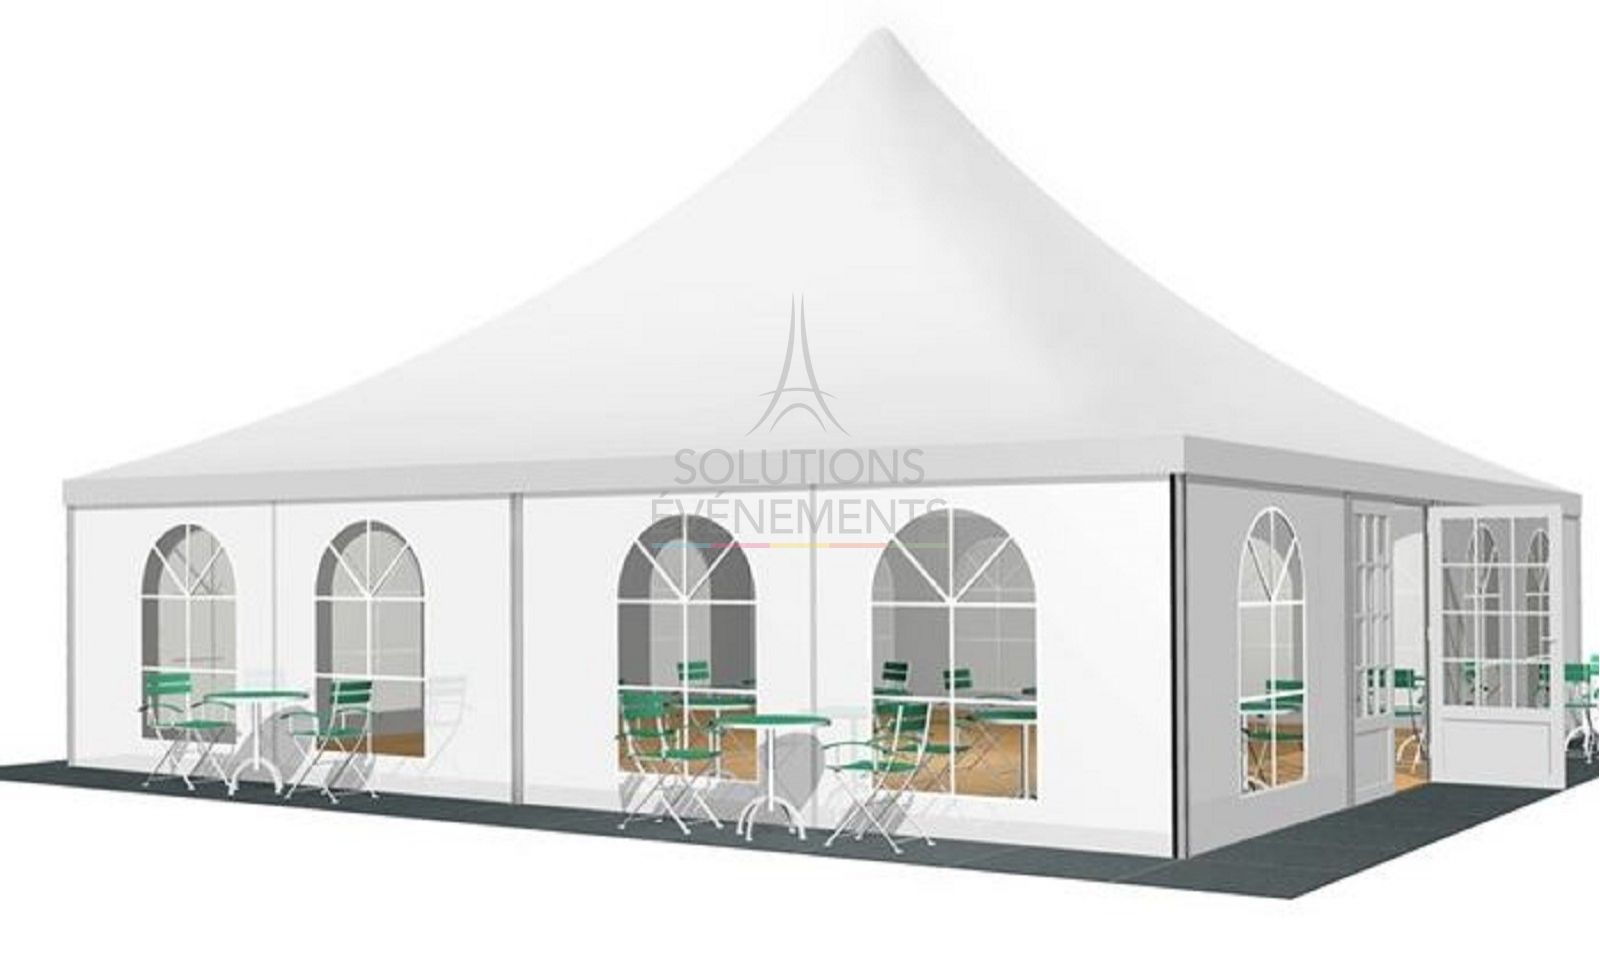 Rental of marquees, reception tents for events and exhibitions